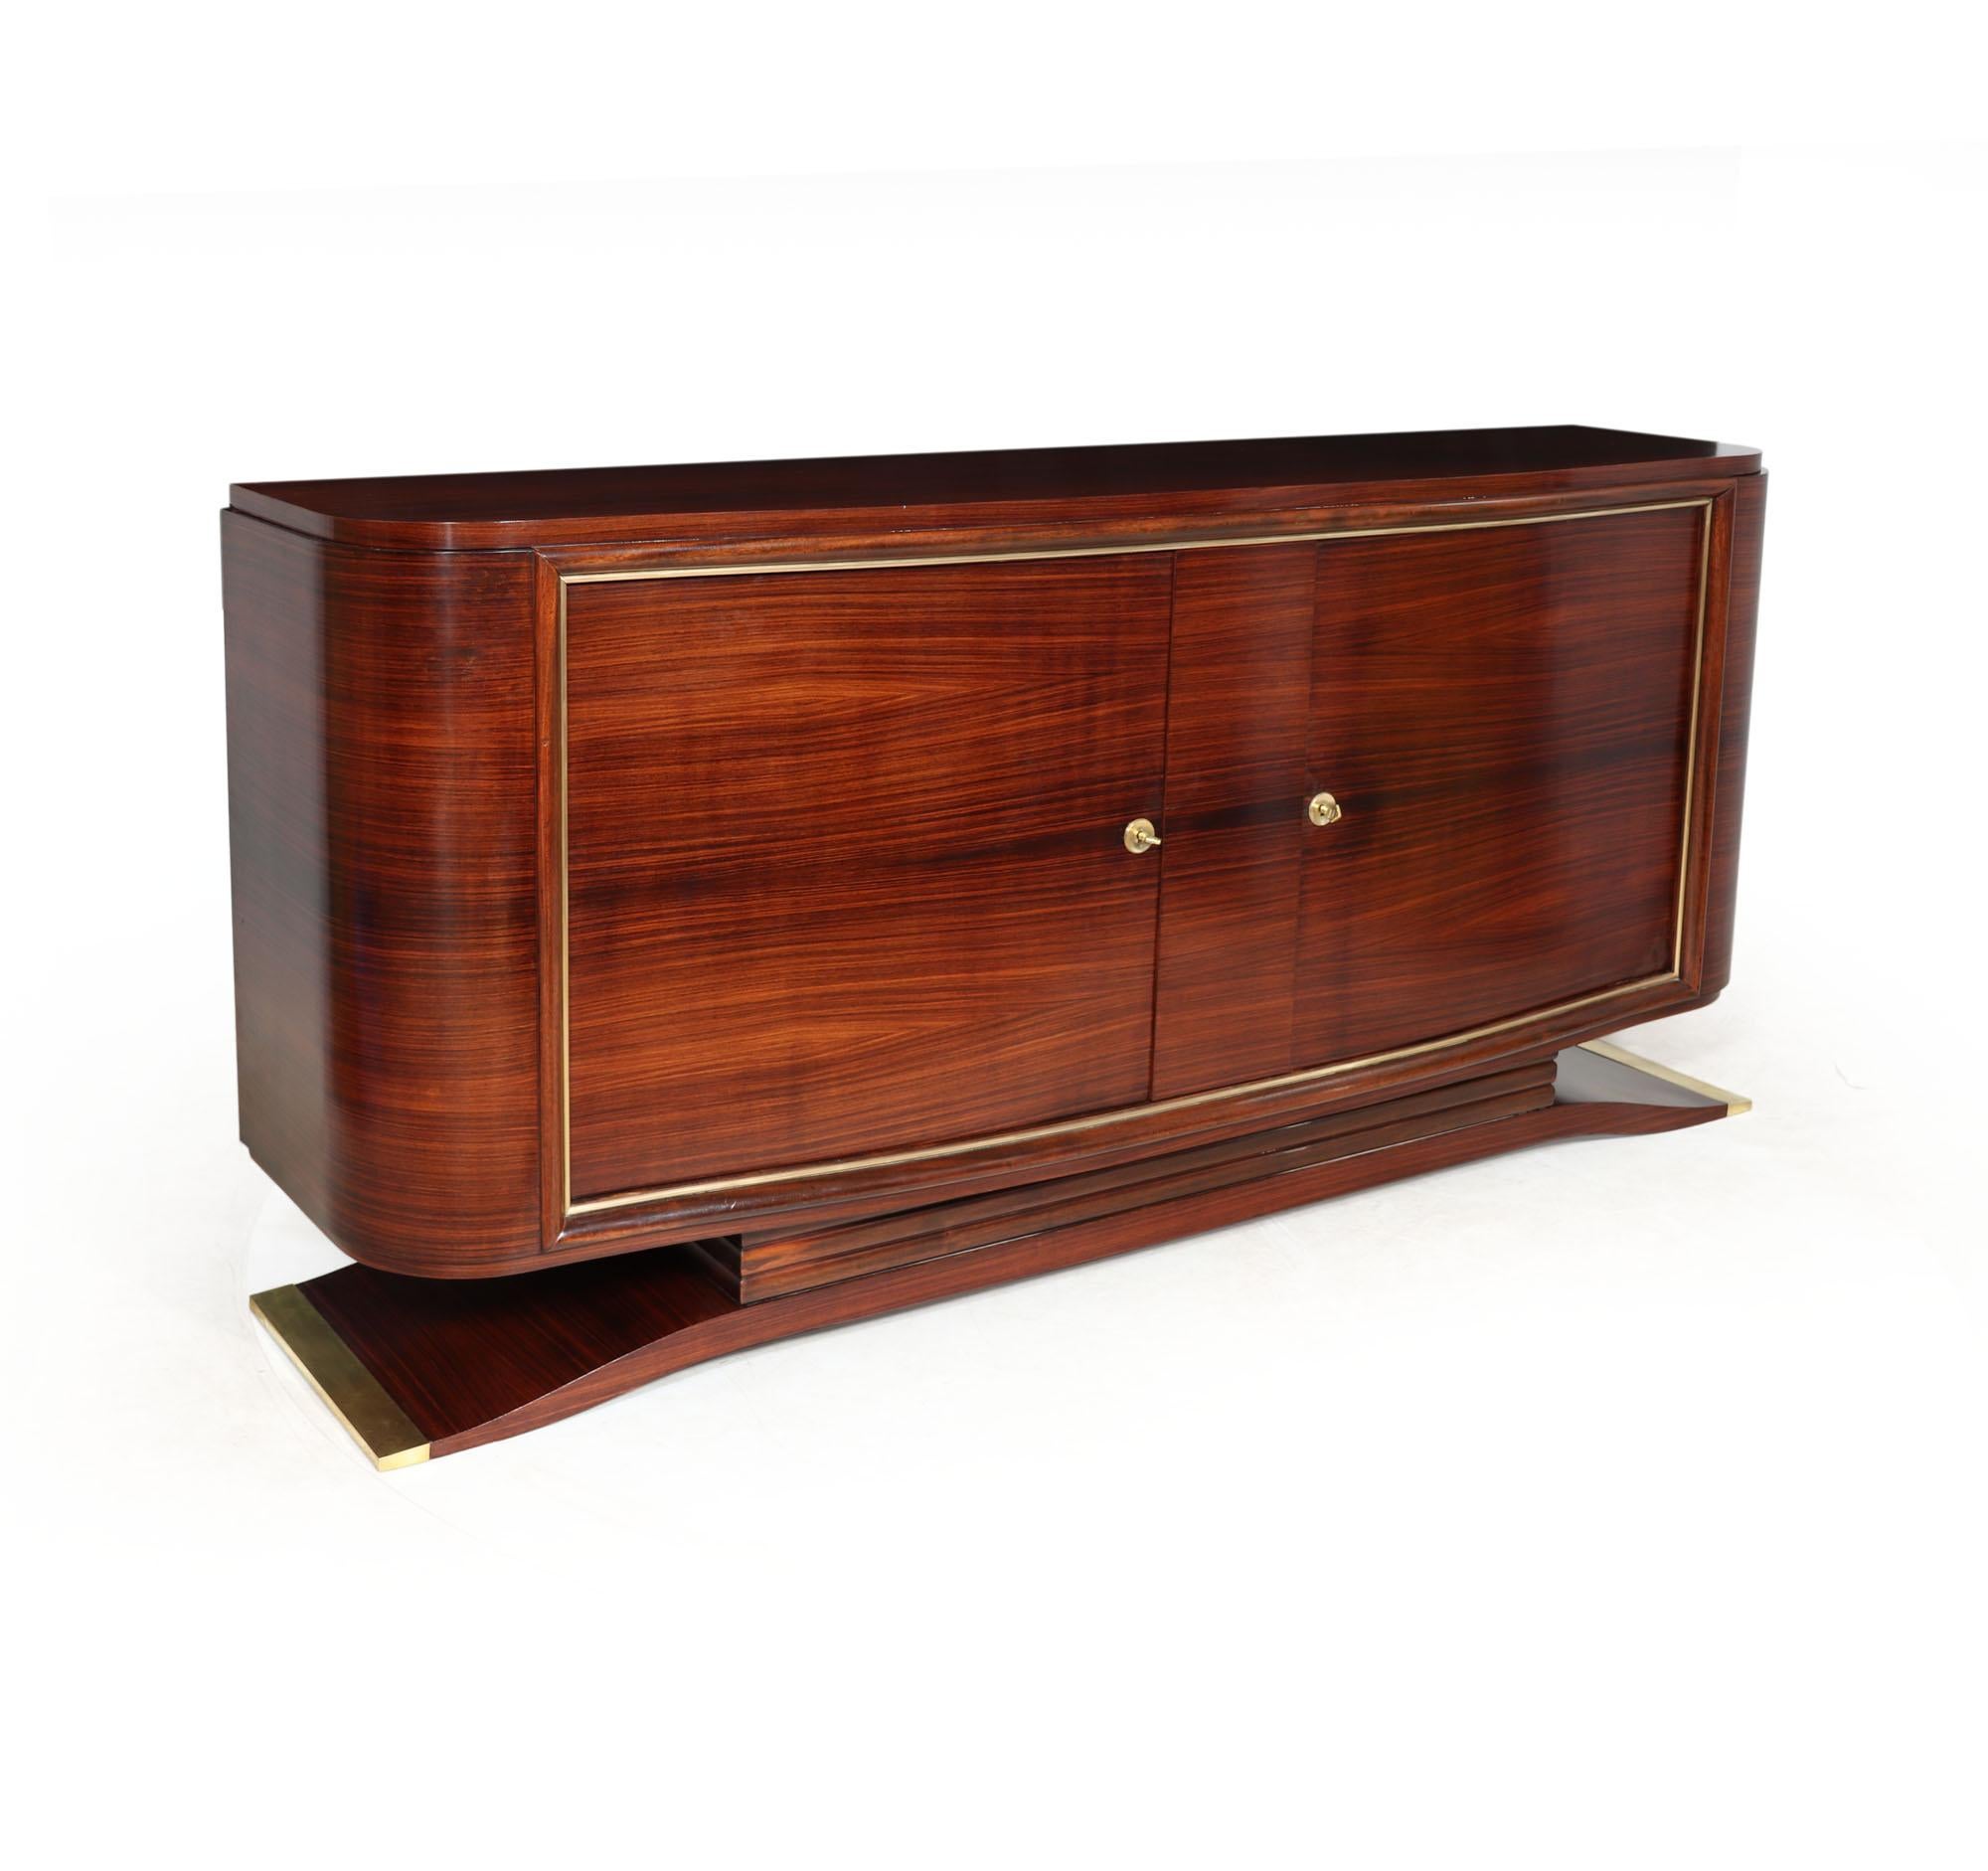 Early 20th Century French Art Deco Rosewood Sideboard by Marcel Cerf